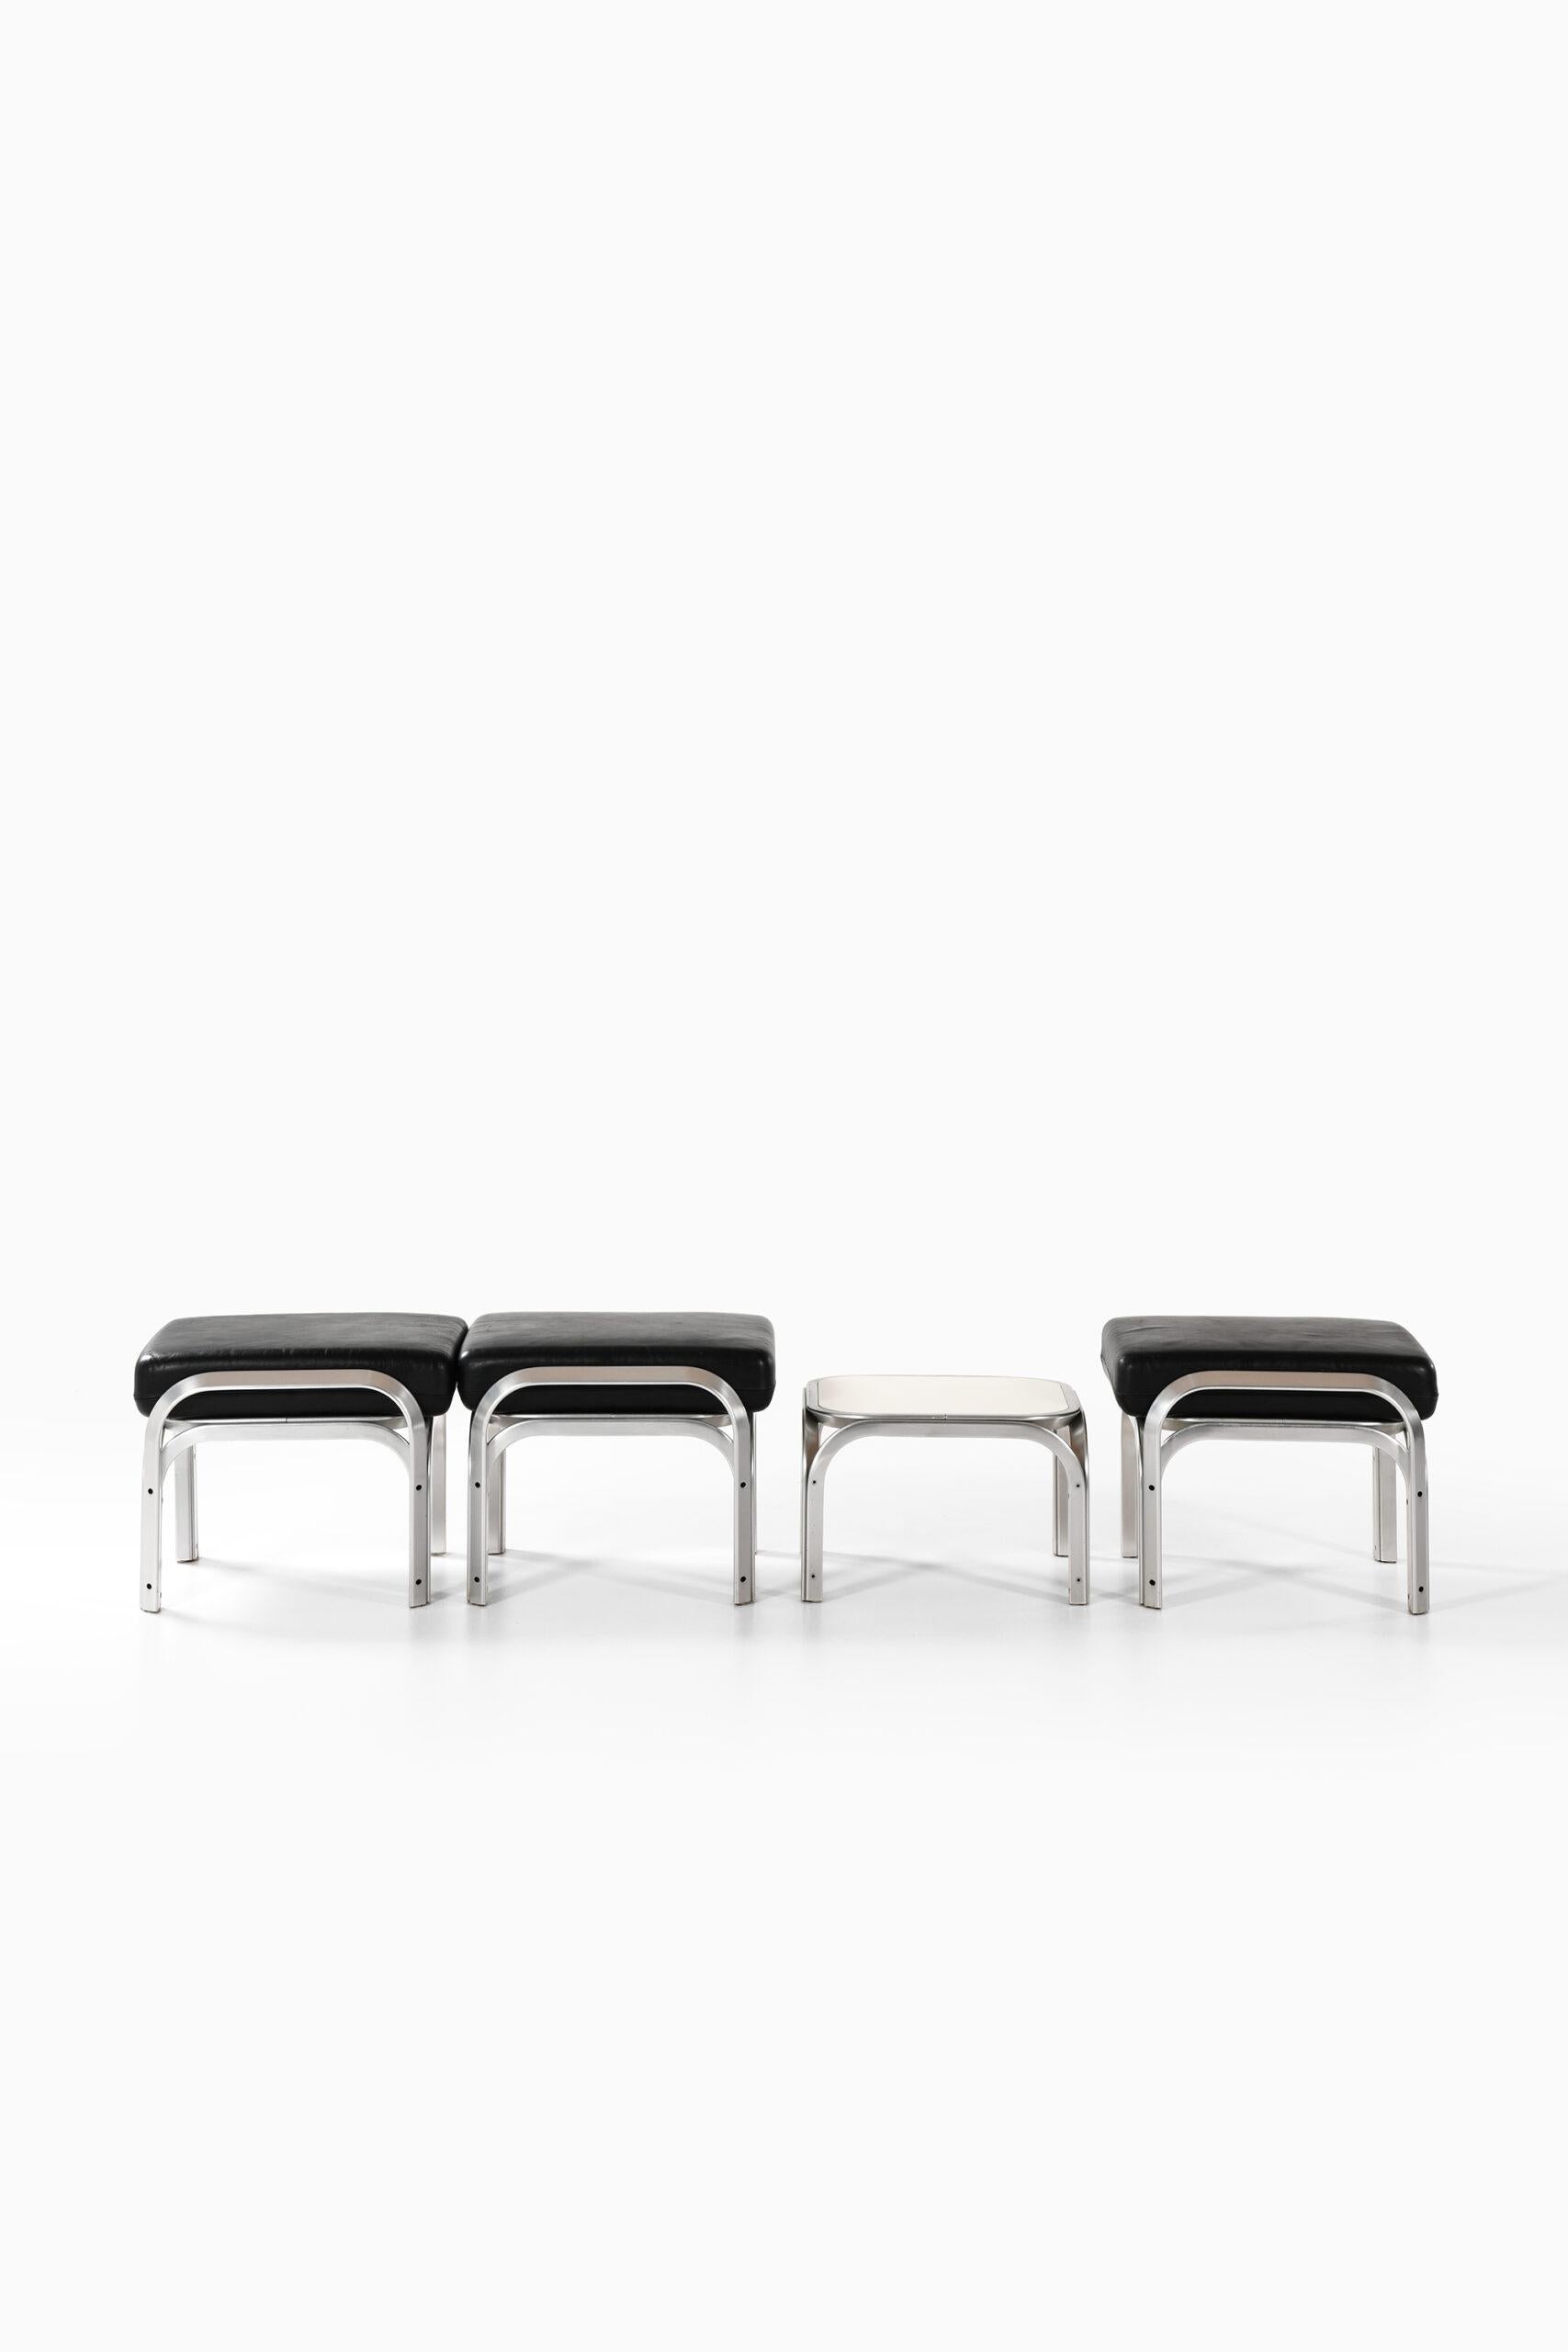 Very rare seating group consisting of 3 stools and table designed by Jørn Utzon. Produced by Fritz Hansen in Denmark.
Dimensions stool: (W x D x H): 56 x 56 x 44 cm.
Dimensions table: (W x D x H): 50 x 50 x 32 cm.